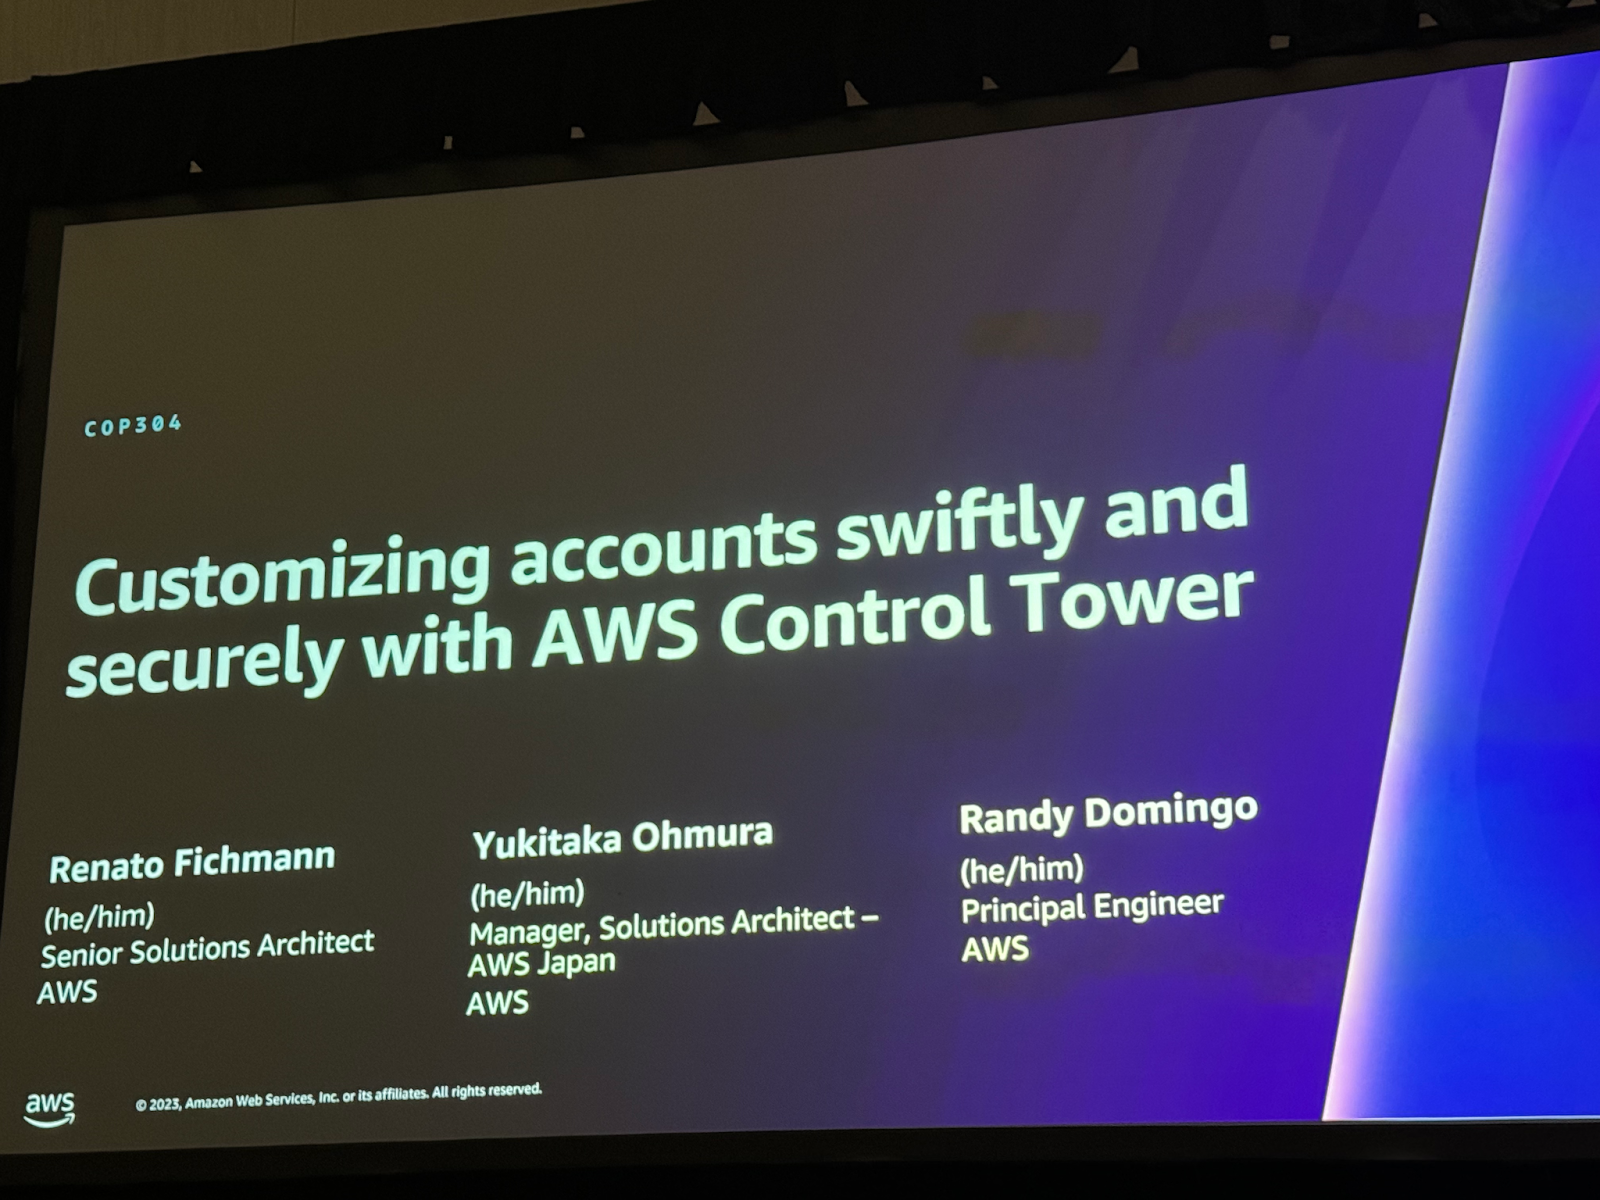 Customizing accounts swiftly and securely with AWS Control Tower